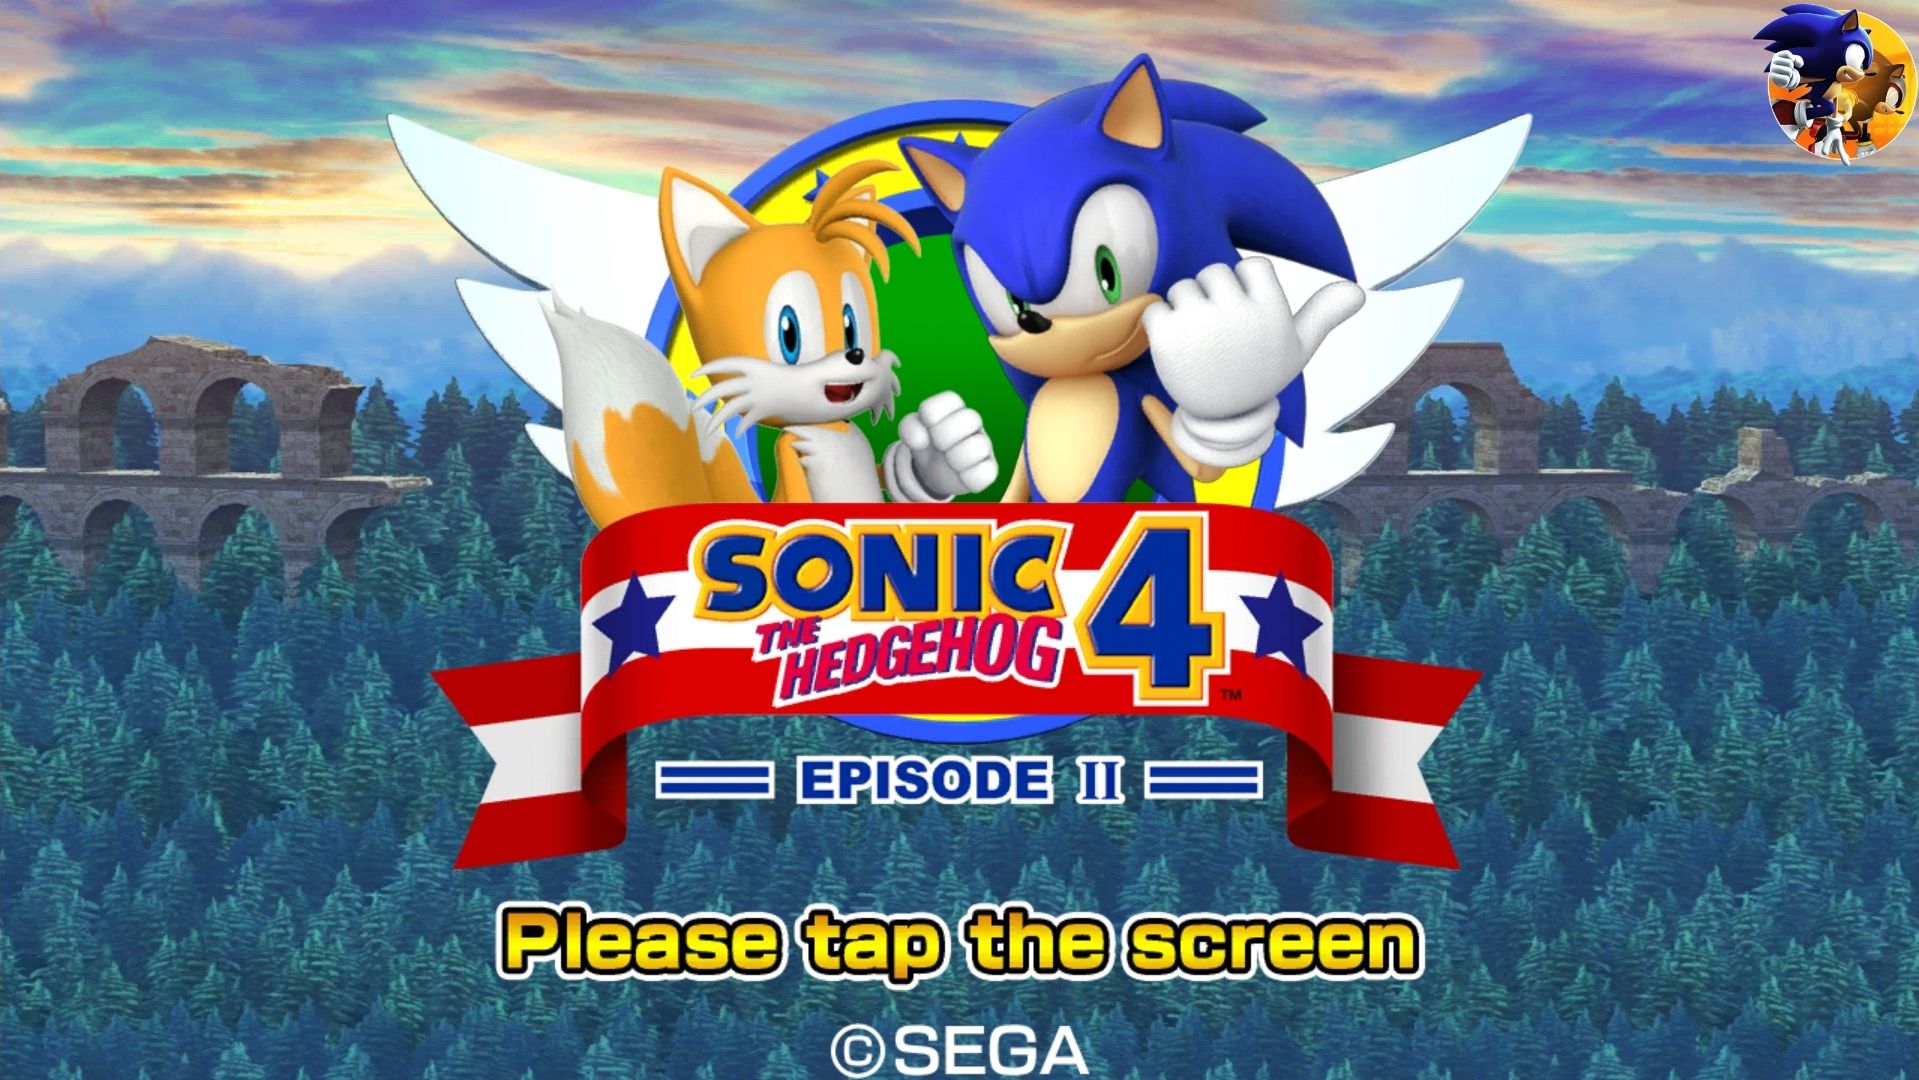 Sonic The Hedgehog 4 Episode II re-released as a SEGA Forever title